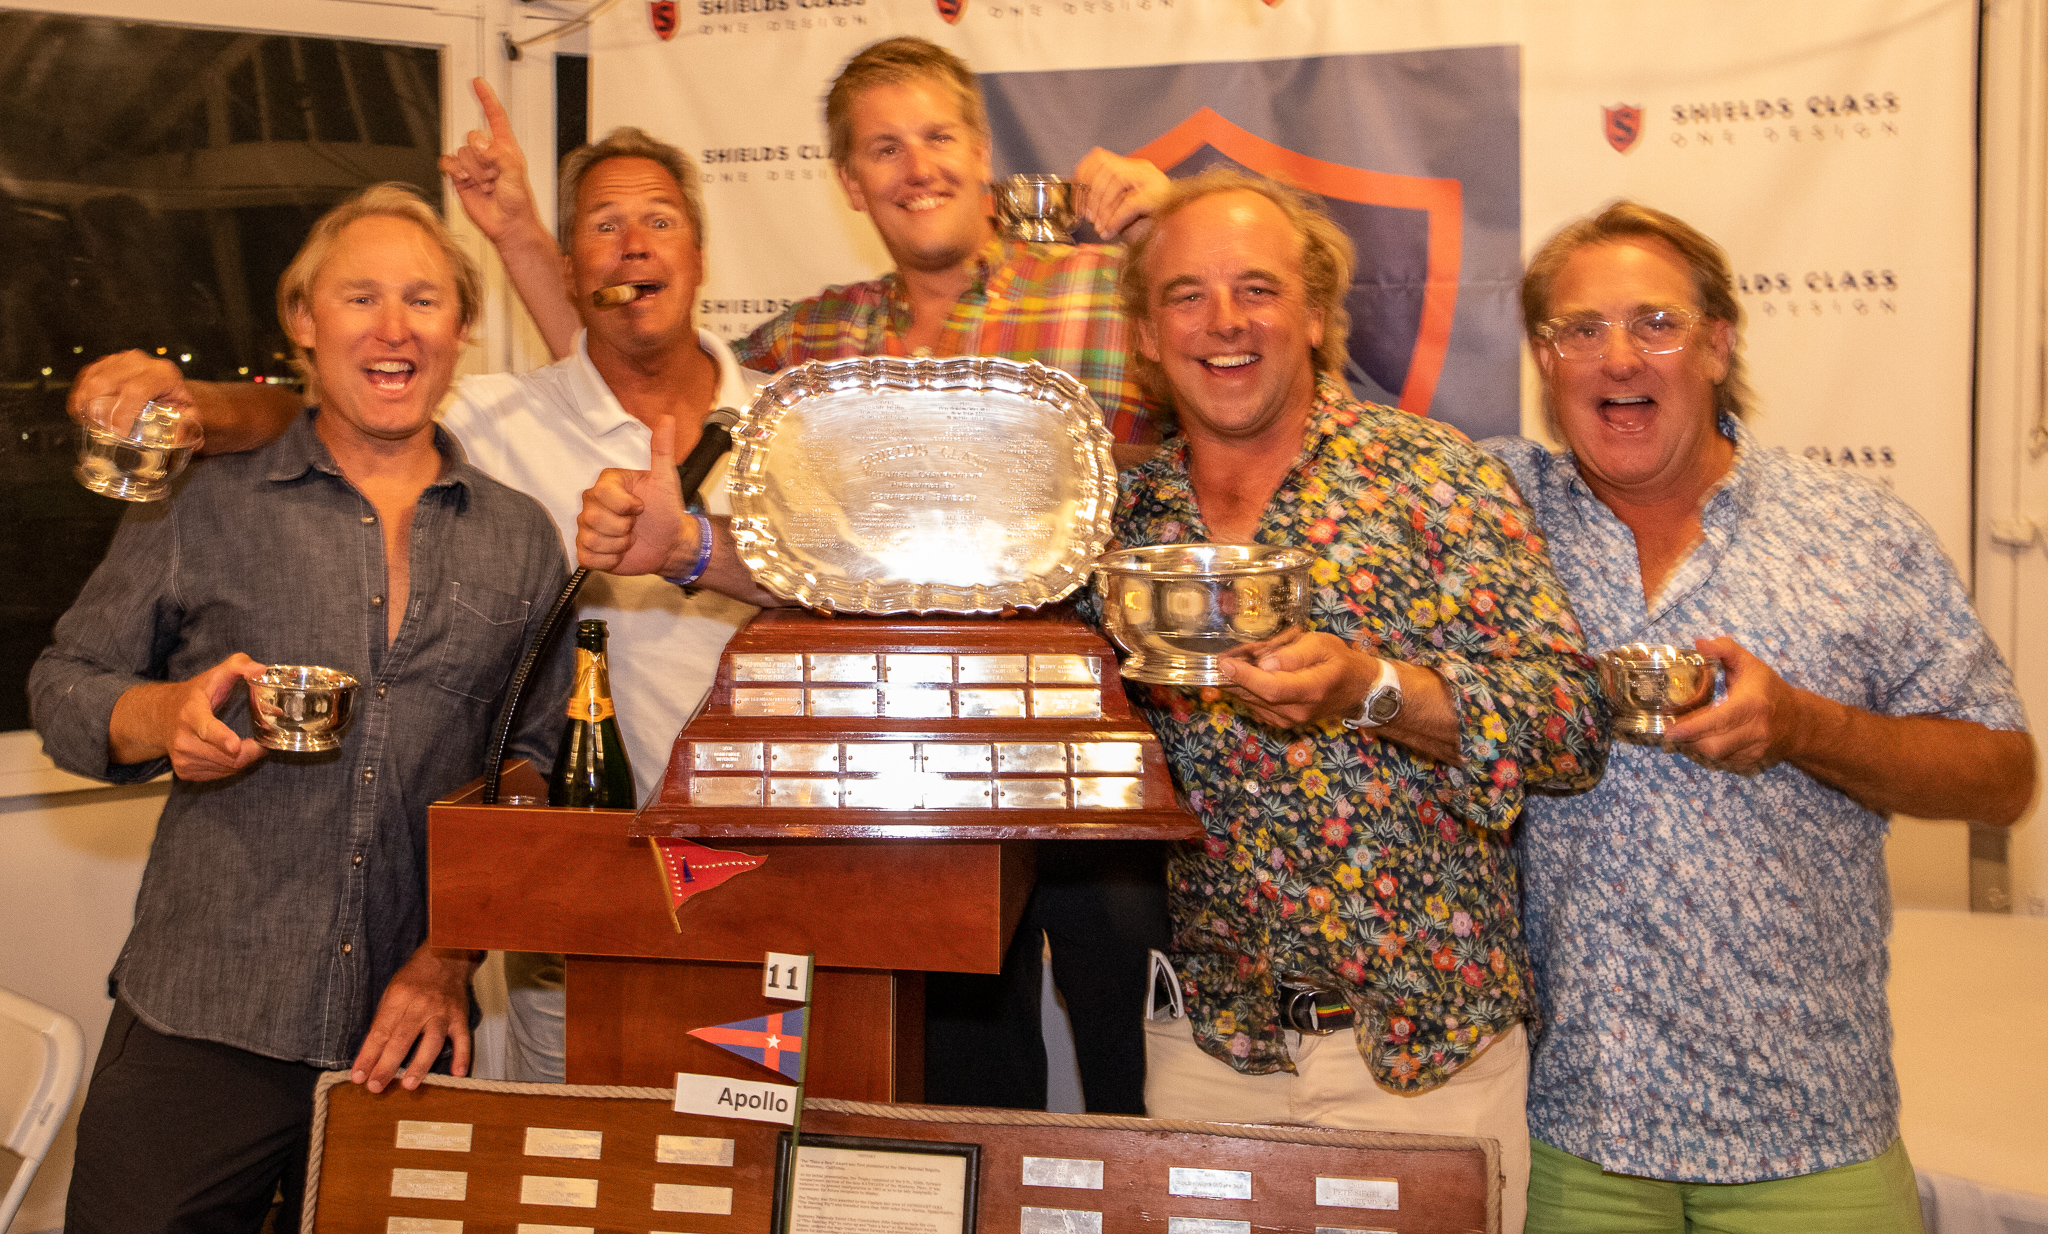 Shields National Championship Trophy and James B. Moore, Jr. Memorial Prize (Crew of Winning Yacht)